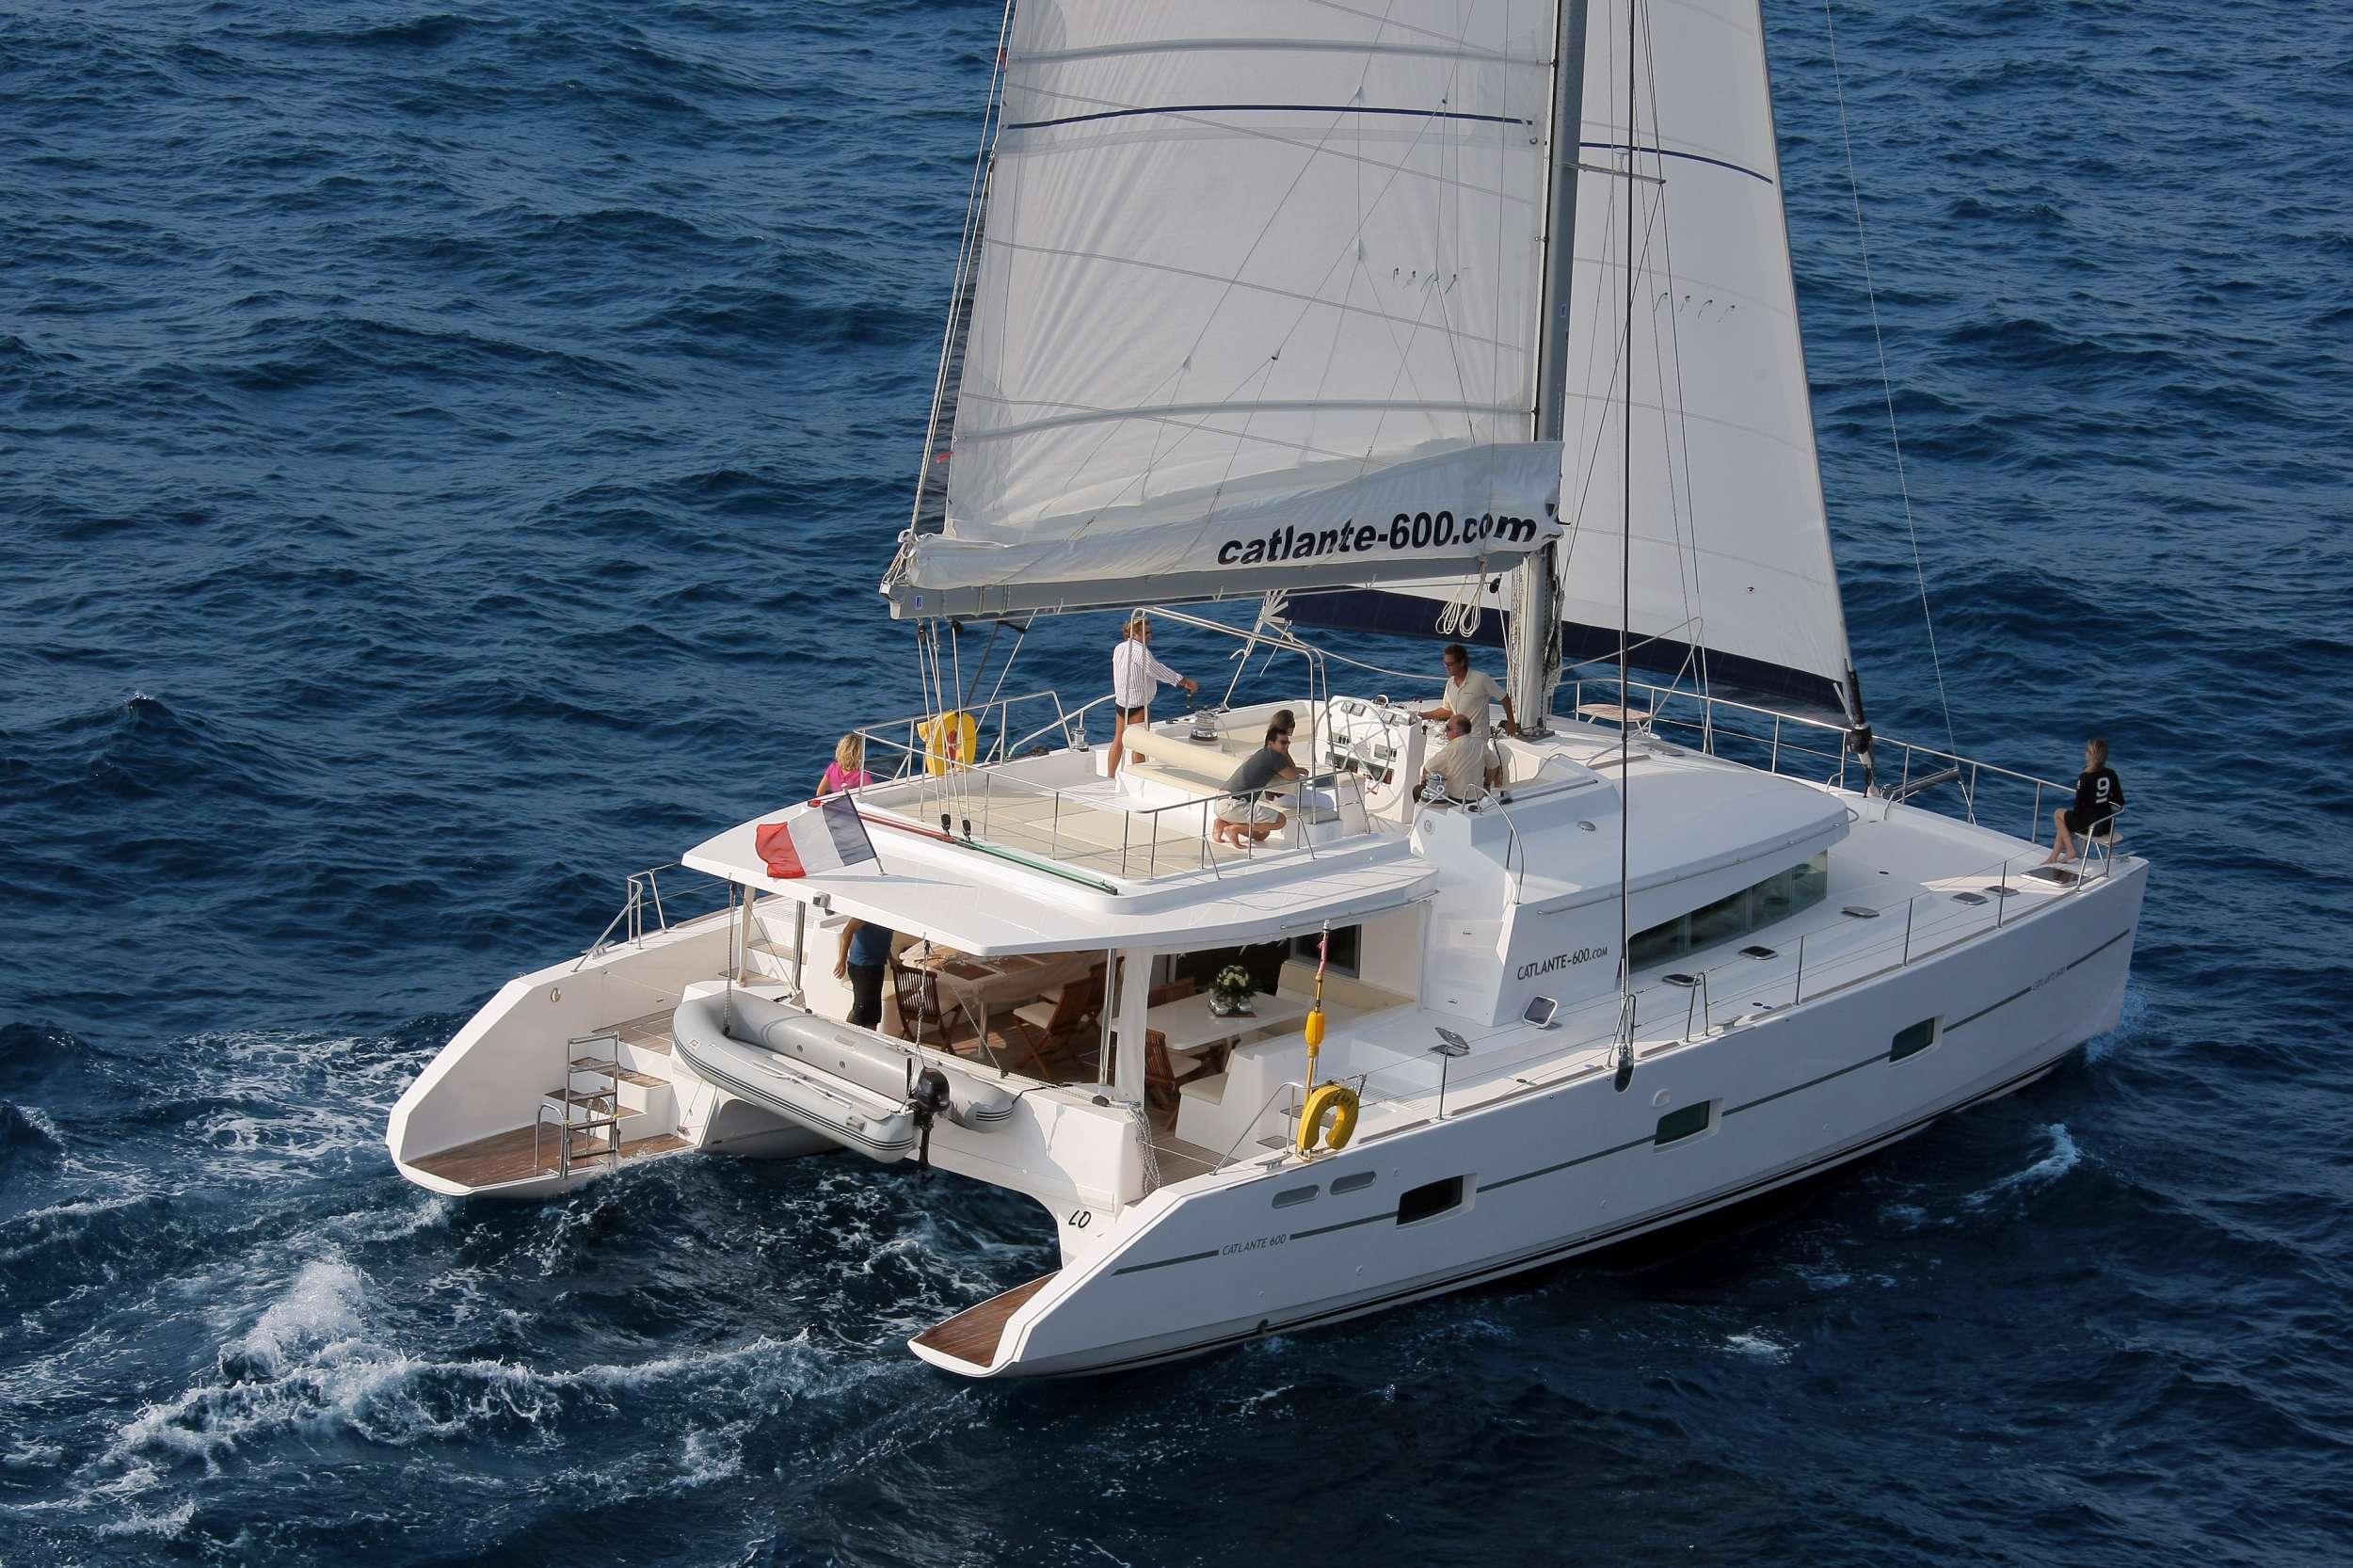 Dream 60 - Littr&eacute; &amp; Tauceti - Luxury yacht charter Maldives & Boat hire in W. Med -Naples/Sicily, W. Med - Spain/Balearics, Croatia Bahamas, Indian Ocean and SE Asia 5